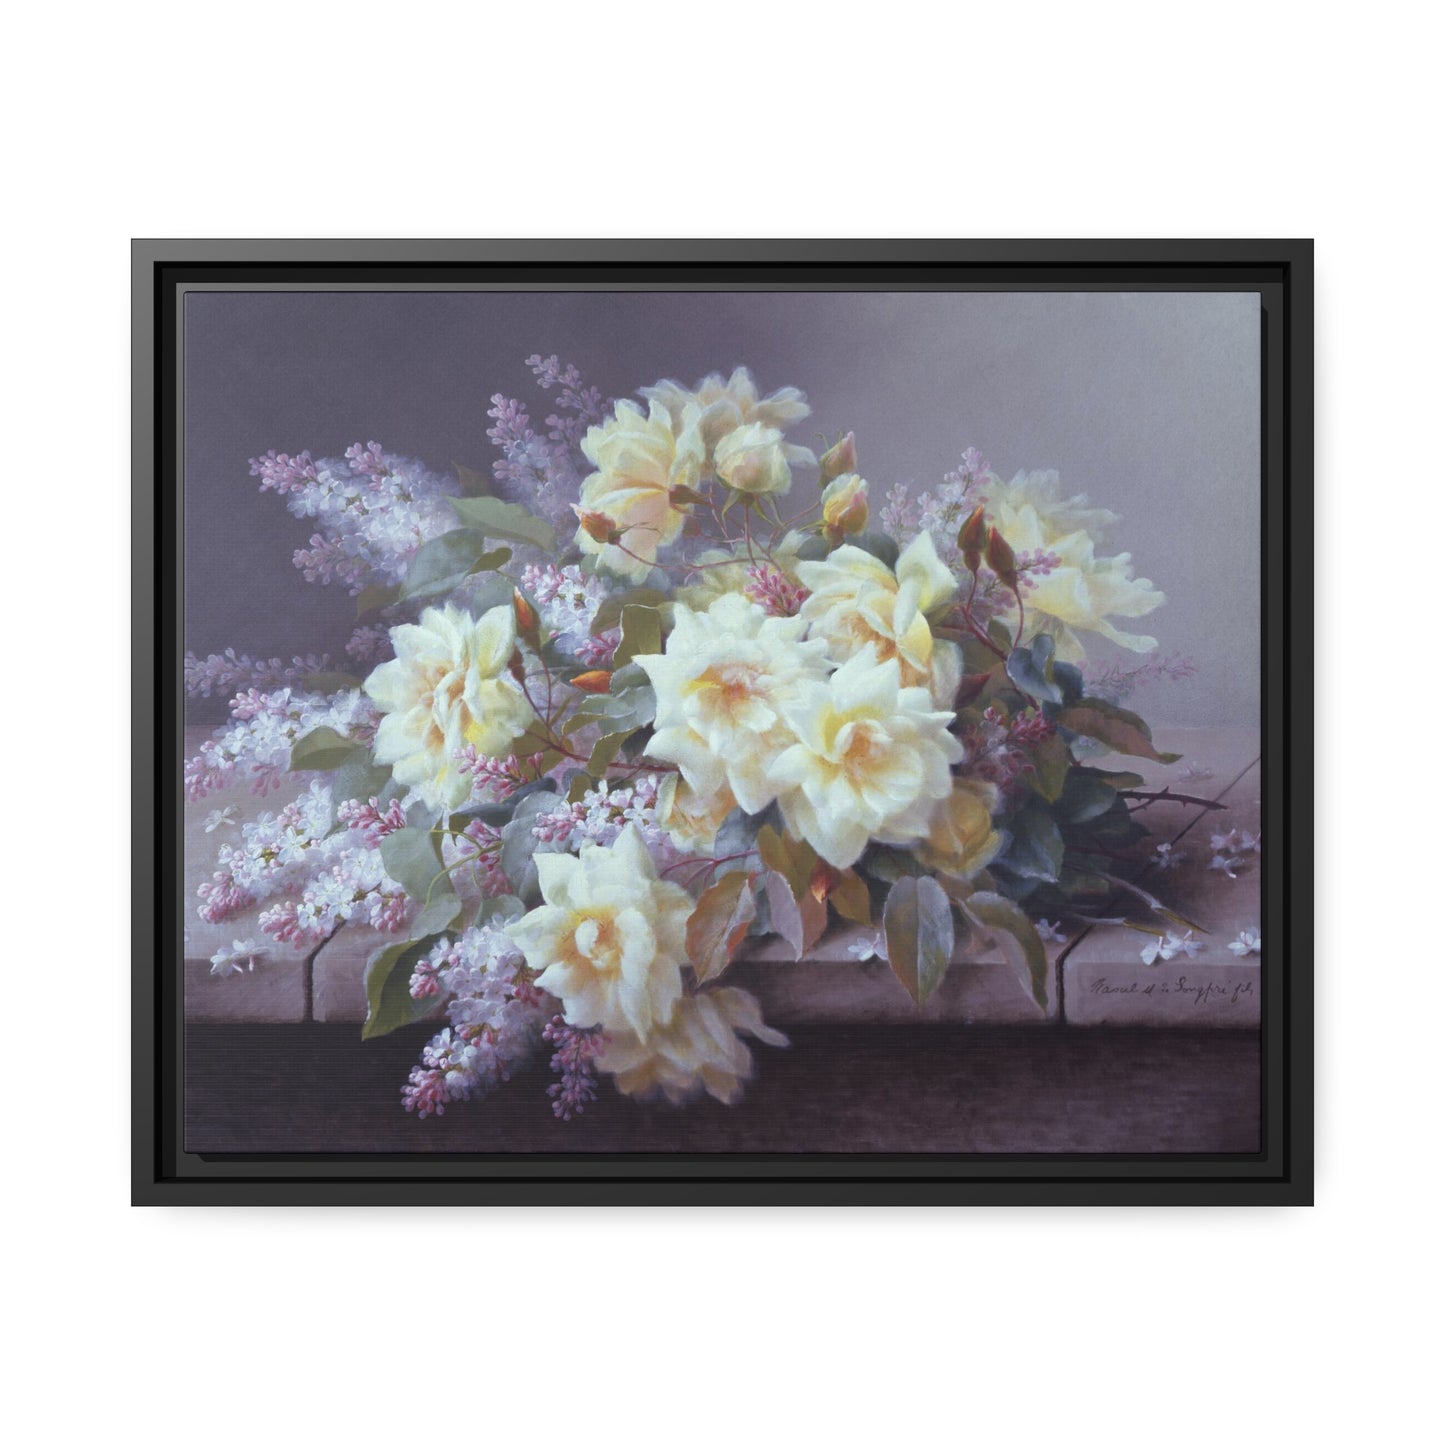 Raoul de Longpre: "Roses and Lilacs on a Stone Ledge" - Framed Canvas Reproduction